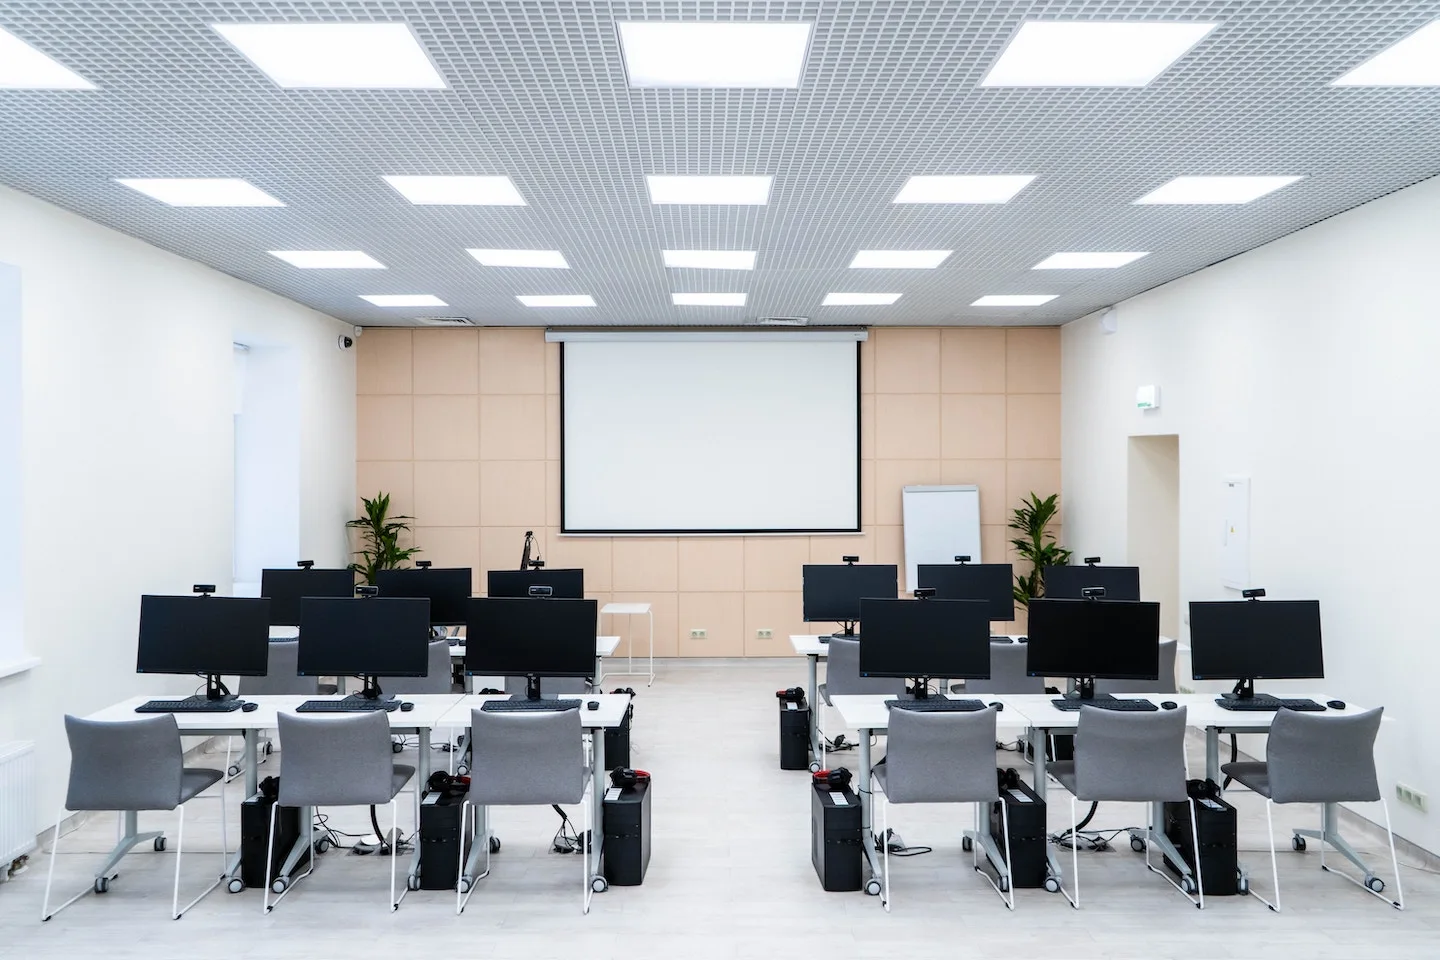 Lecture room with overhead lighting fixture installations.